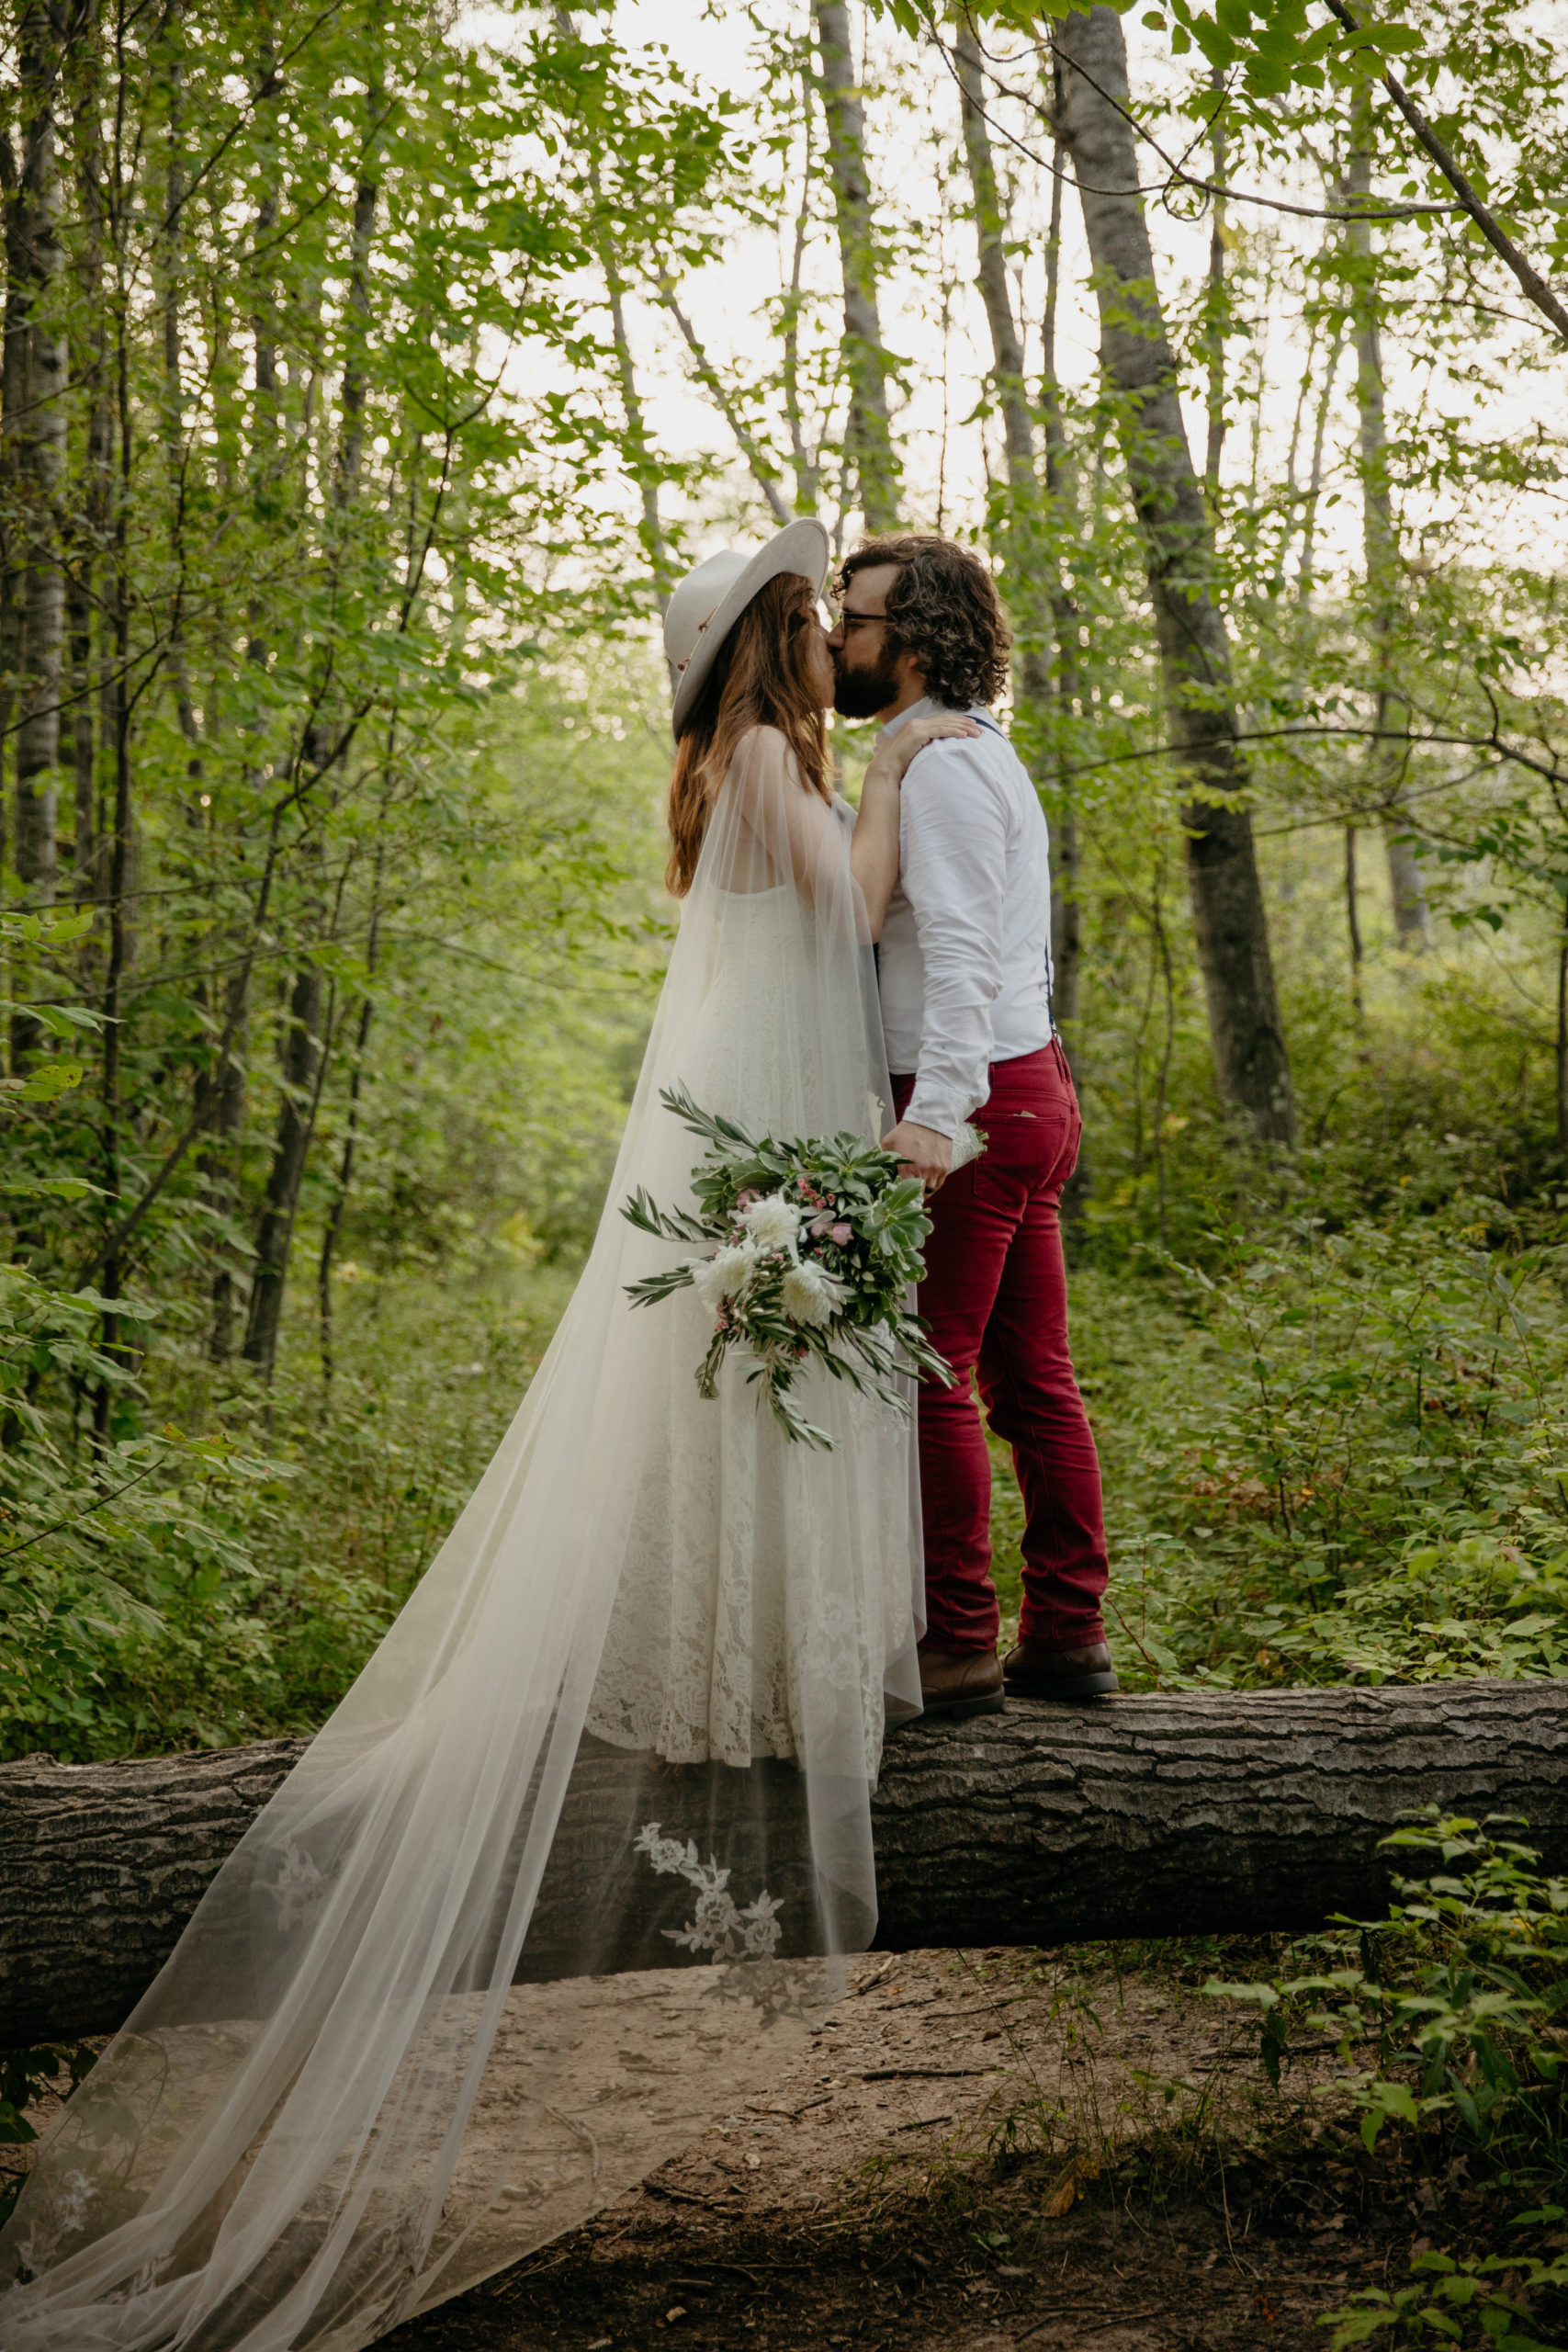 Magical Manistee Forest Elopement in Michigan // An elopement out of a fairytale